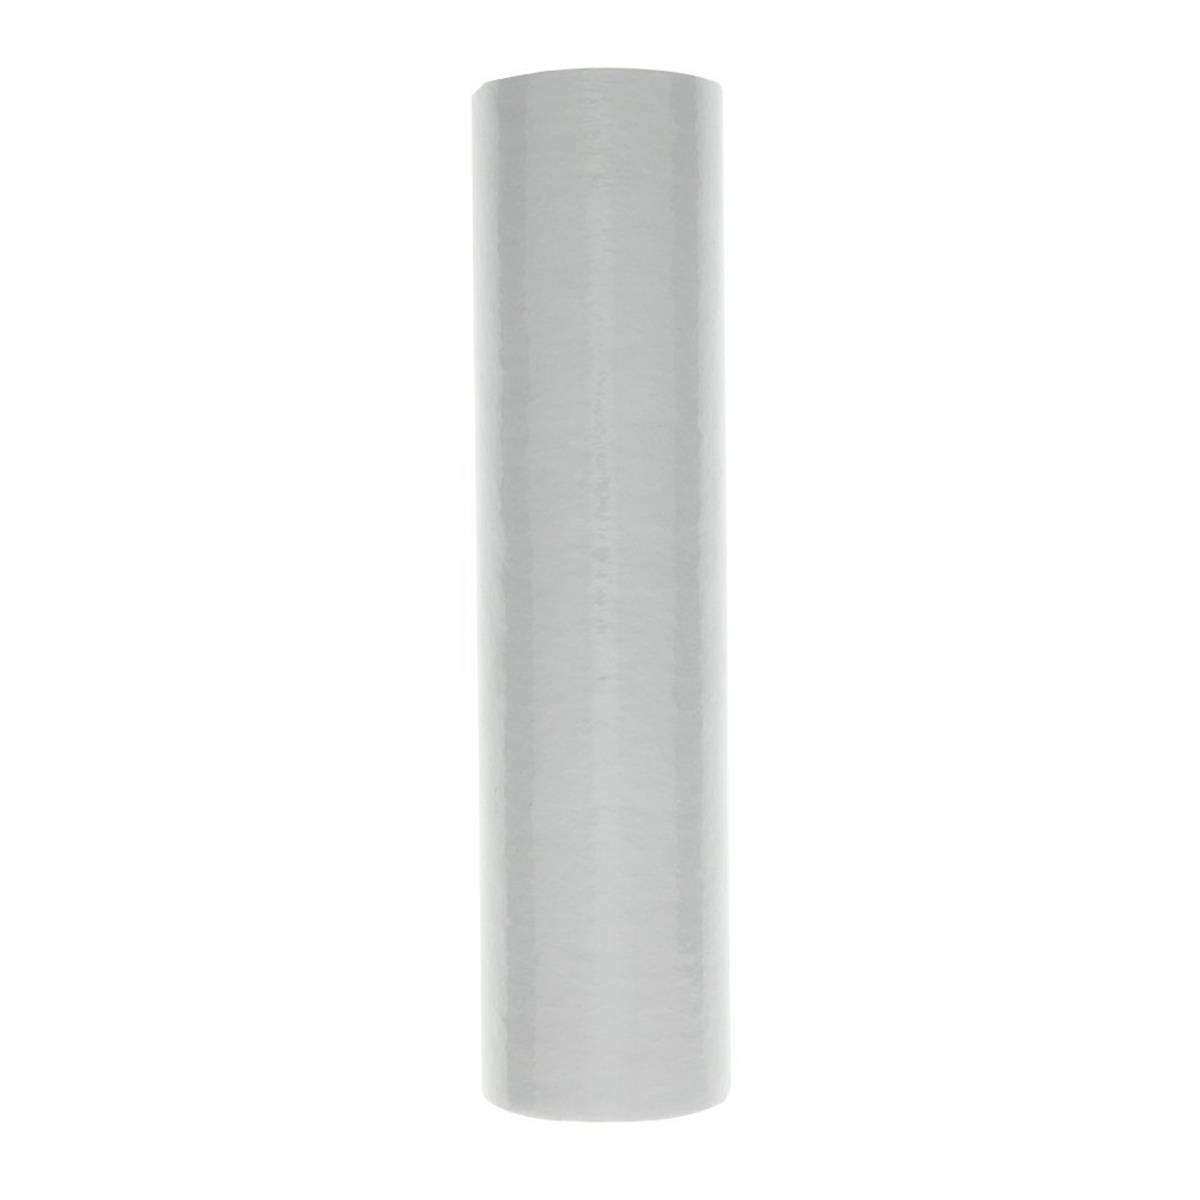 Hydronix-sdc-25-1001 Nsf Sediment Filter 2.5 In. Od X 9.87 In. Length, 1 Micron